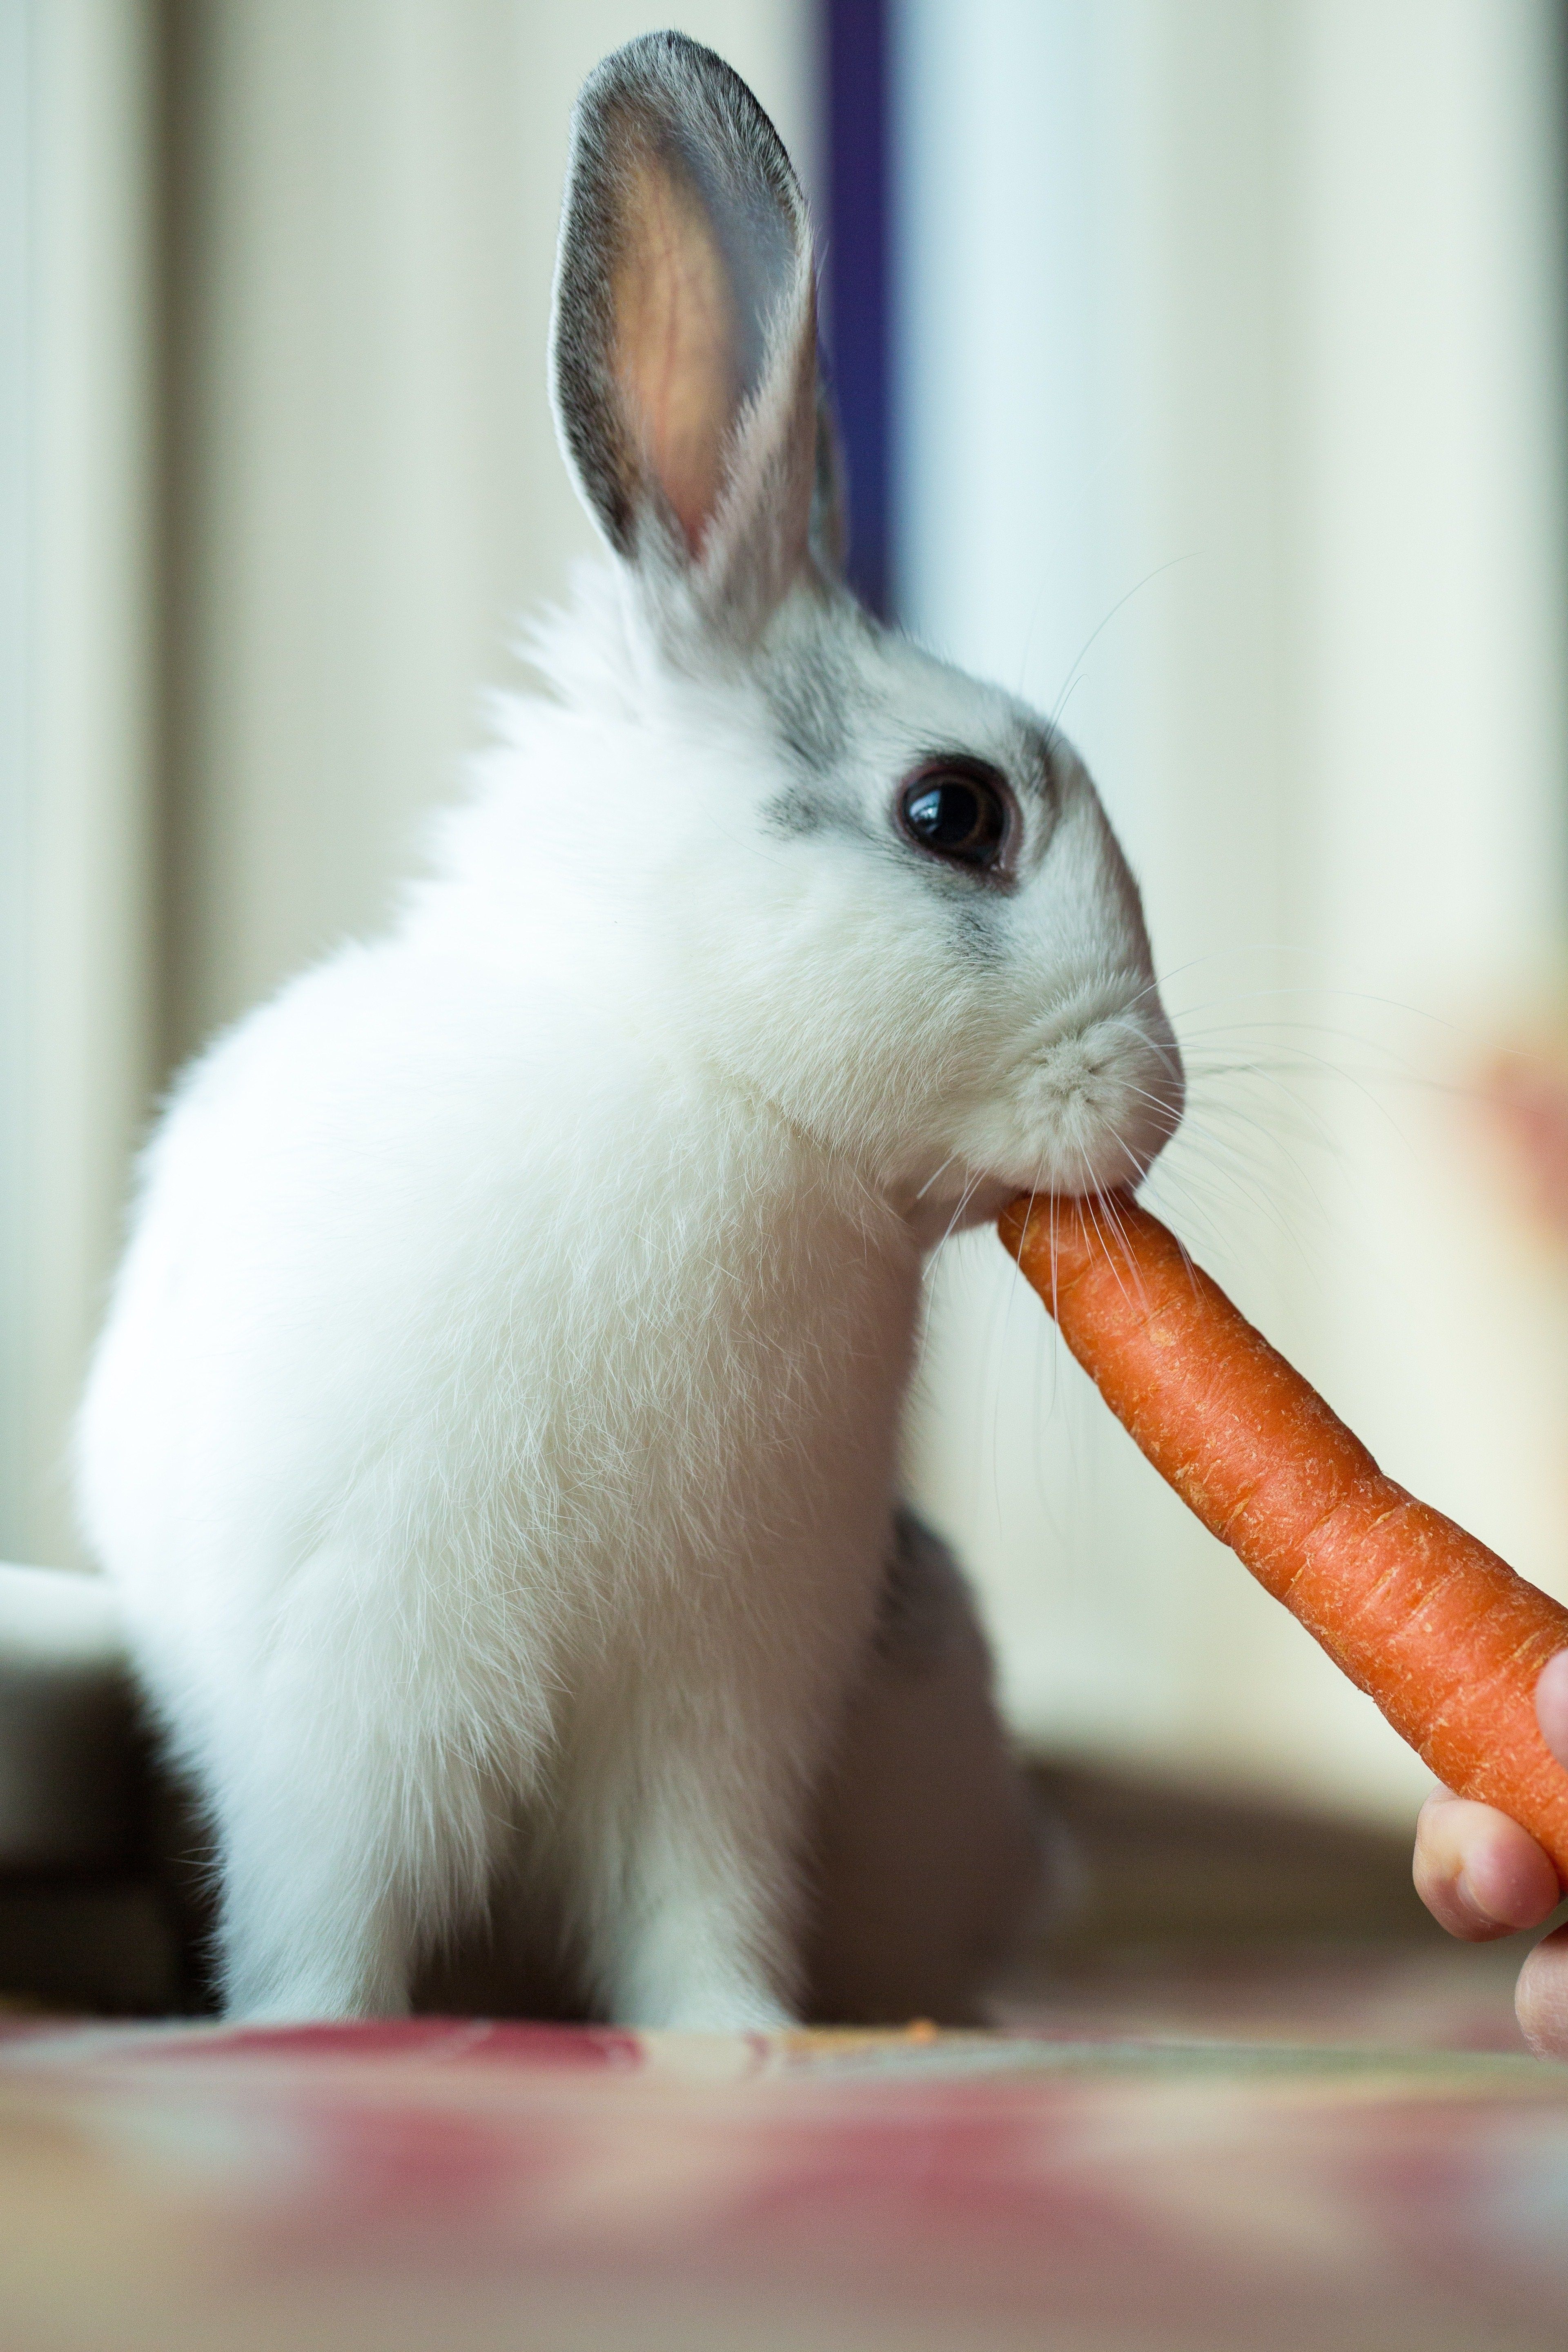 A little rabbit is fed a carrot by a child.